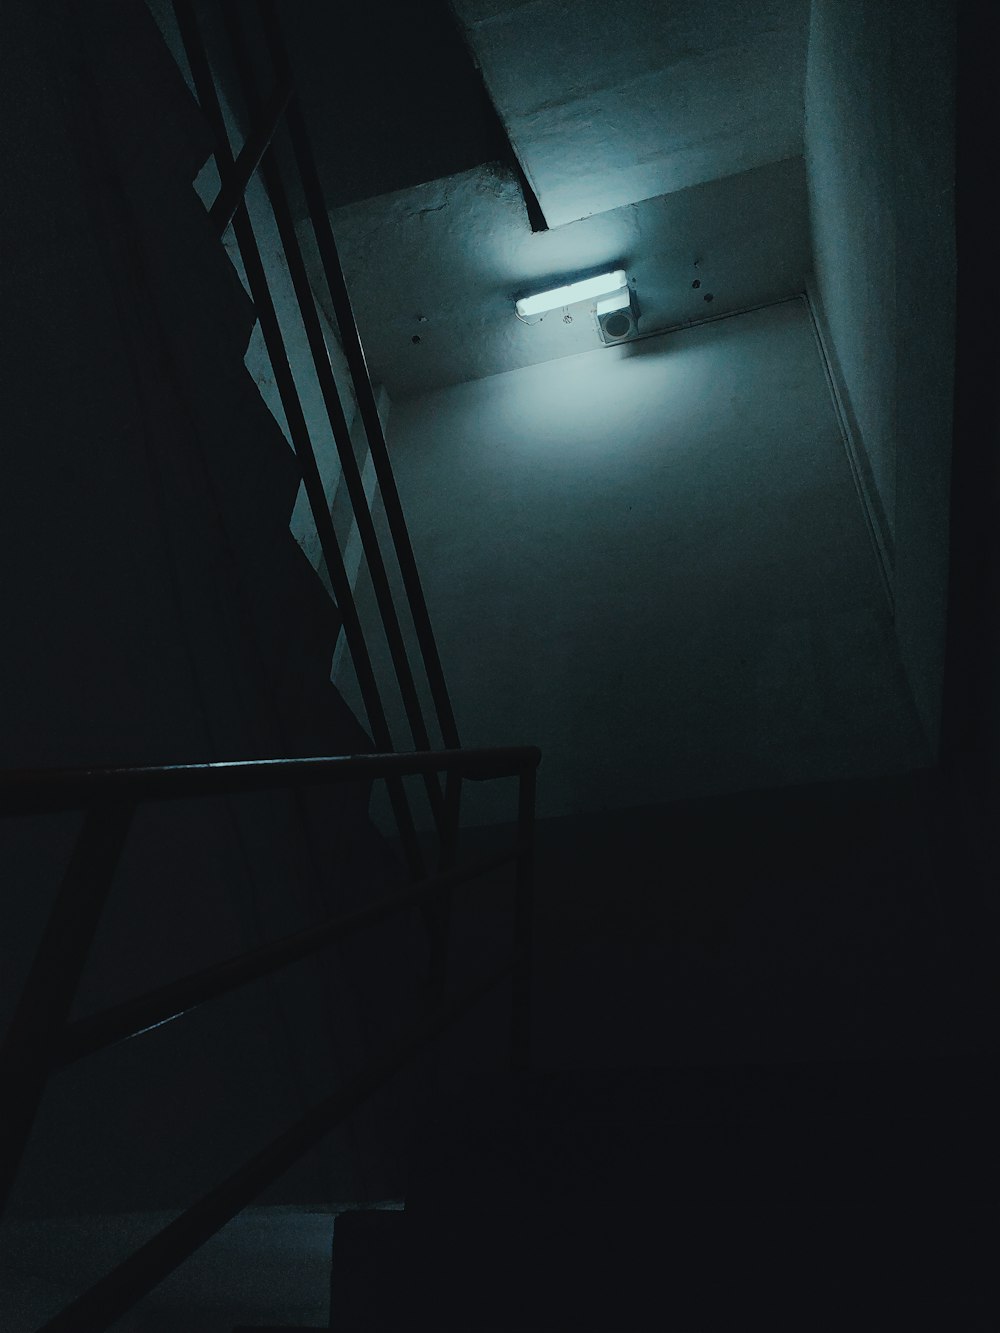 a dark hallway with stairs and a light at the end